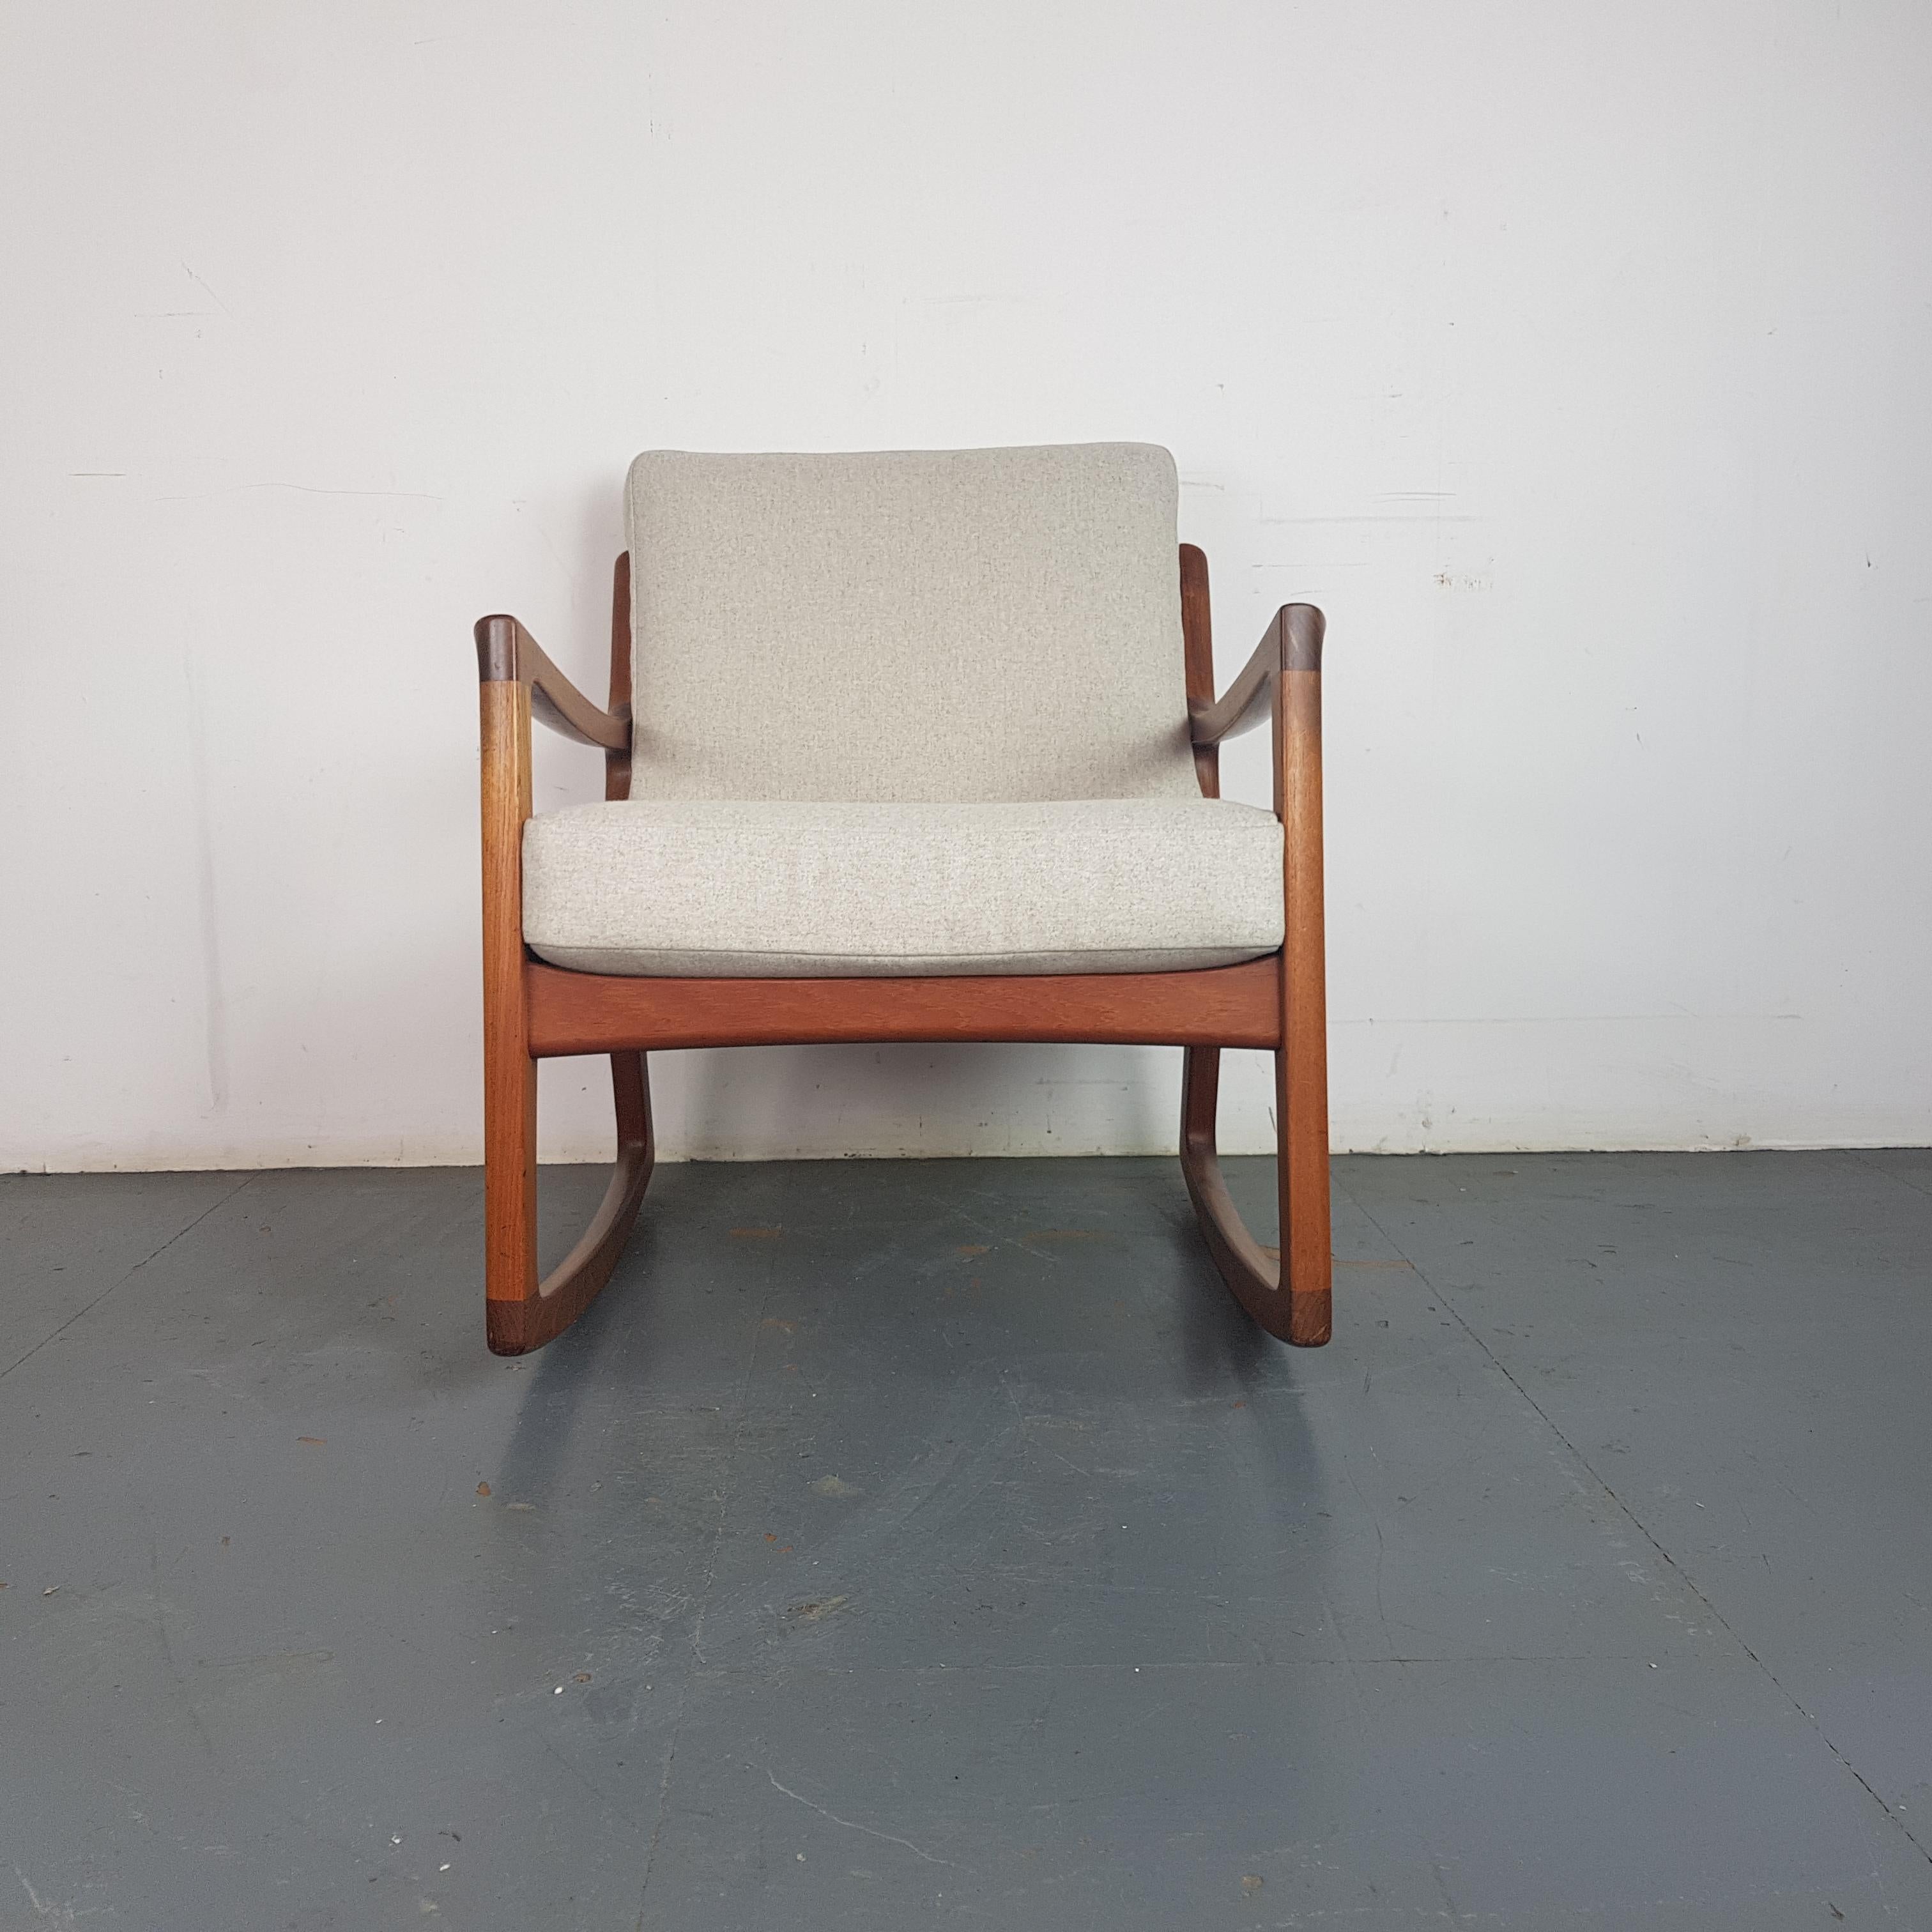 1960s solid teak rocking chair designed by Ole Wanscher for France & Son, Denmark. With original spring loaded cushions reupholstered in a Abraham Moon grey upholstery.

Approximate dimensions:

Height 78 cm

Width 68 cm

Depth 72 cm

Seat